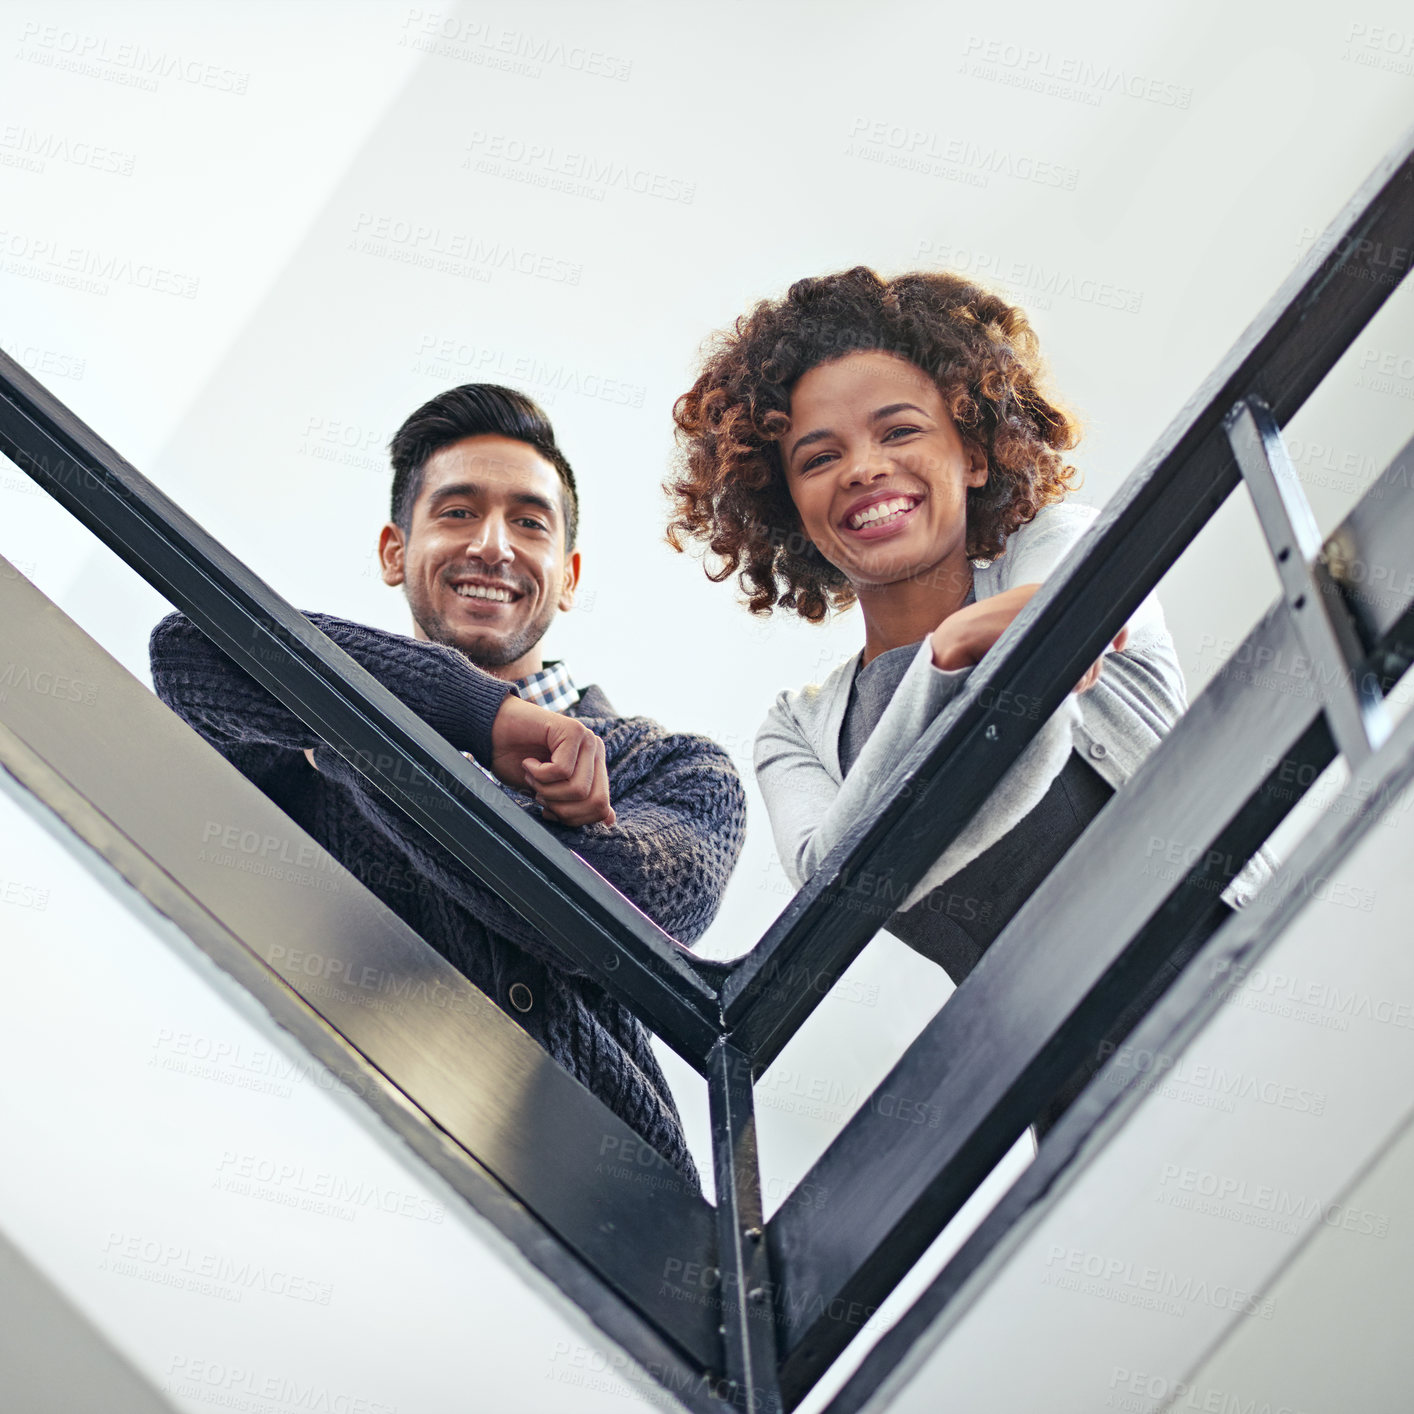 Buy stock photo Low angle portrait of two coworkers leaning on a stairwell bannister